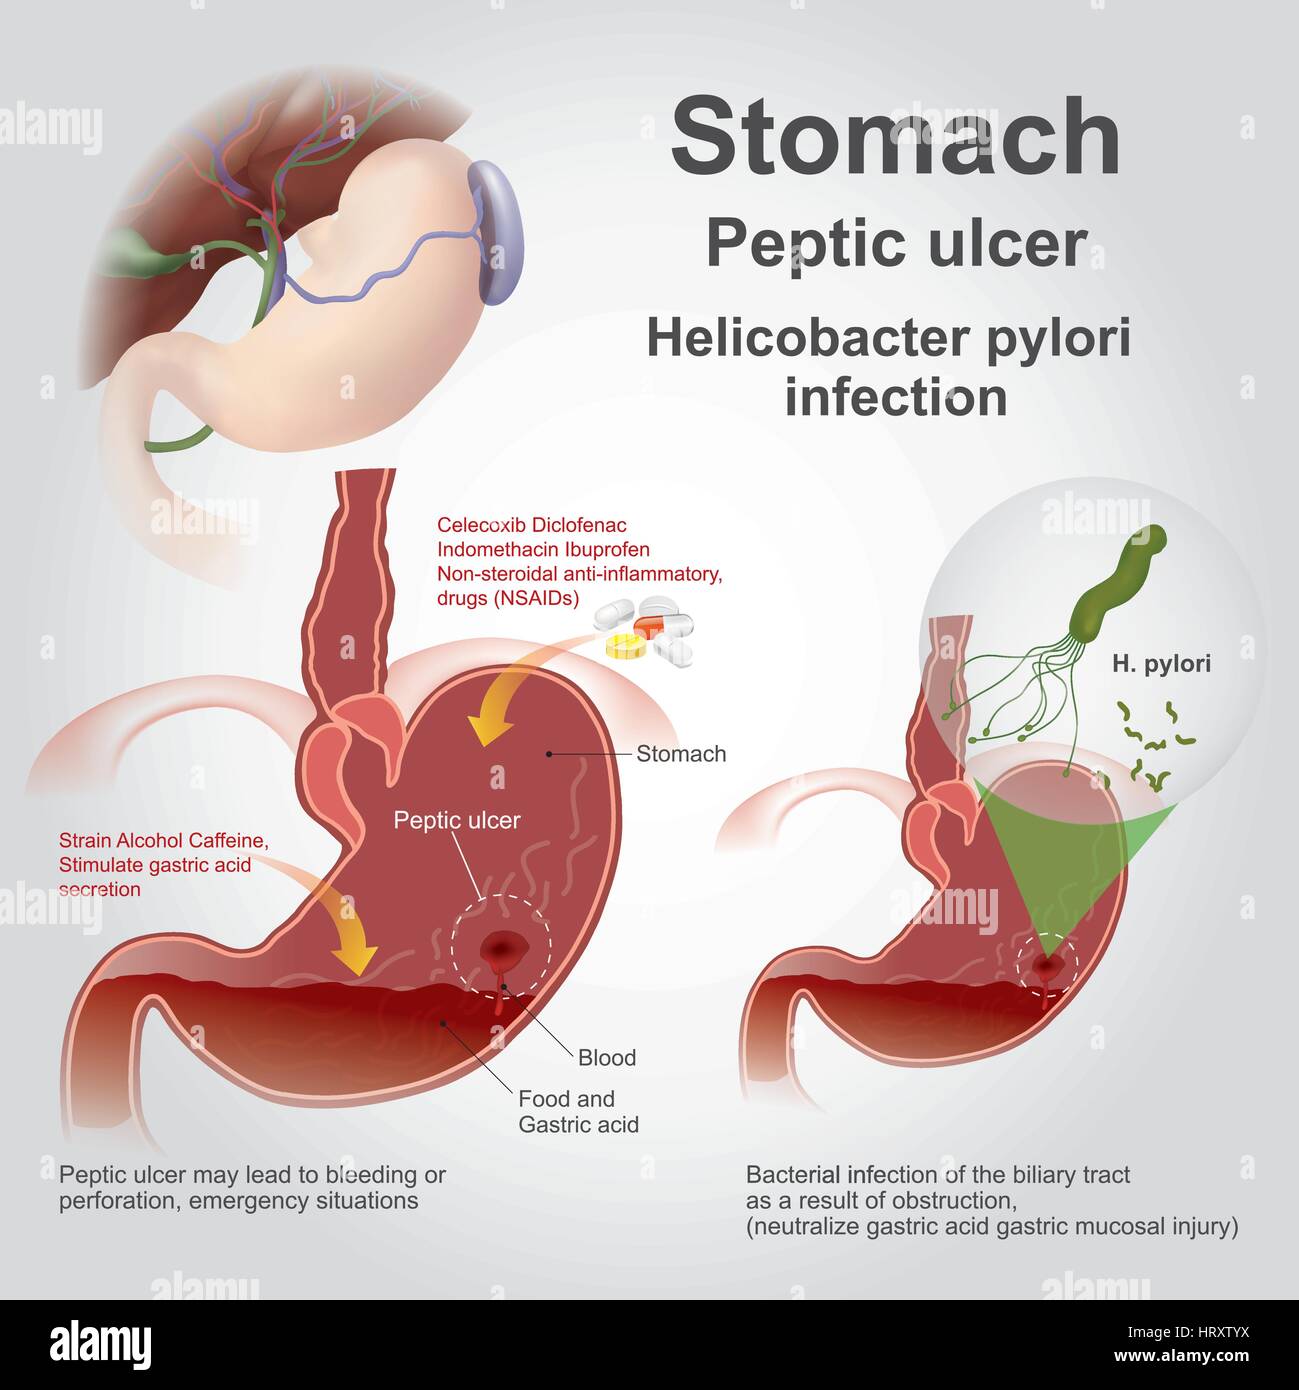 eptic ulcer disease, also known as a peptic ulcer or stomach ulcer, is a break in the lining of the stomach, first part of the small intestine, or occ Stock Vector